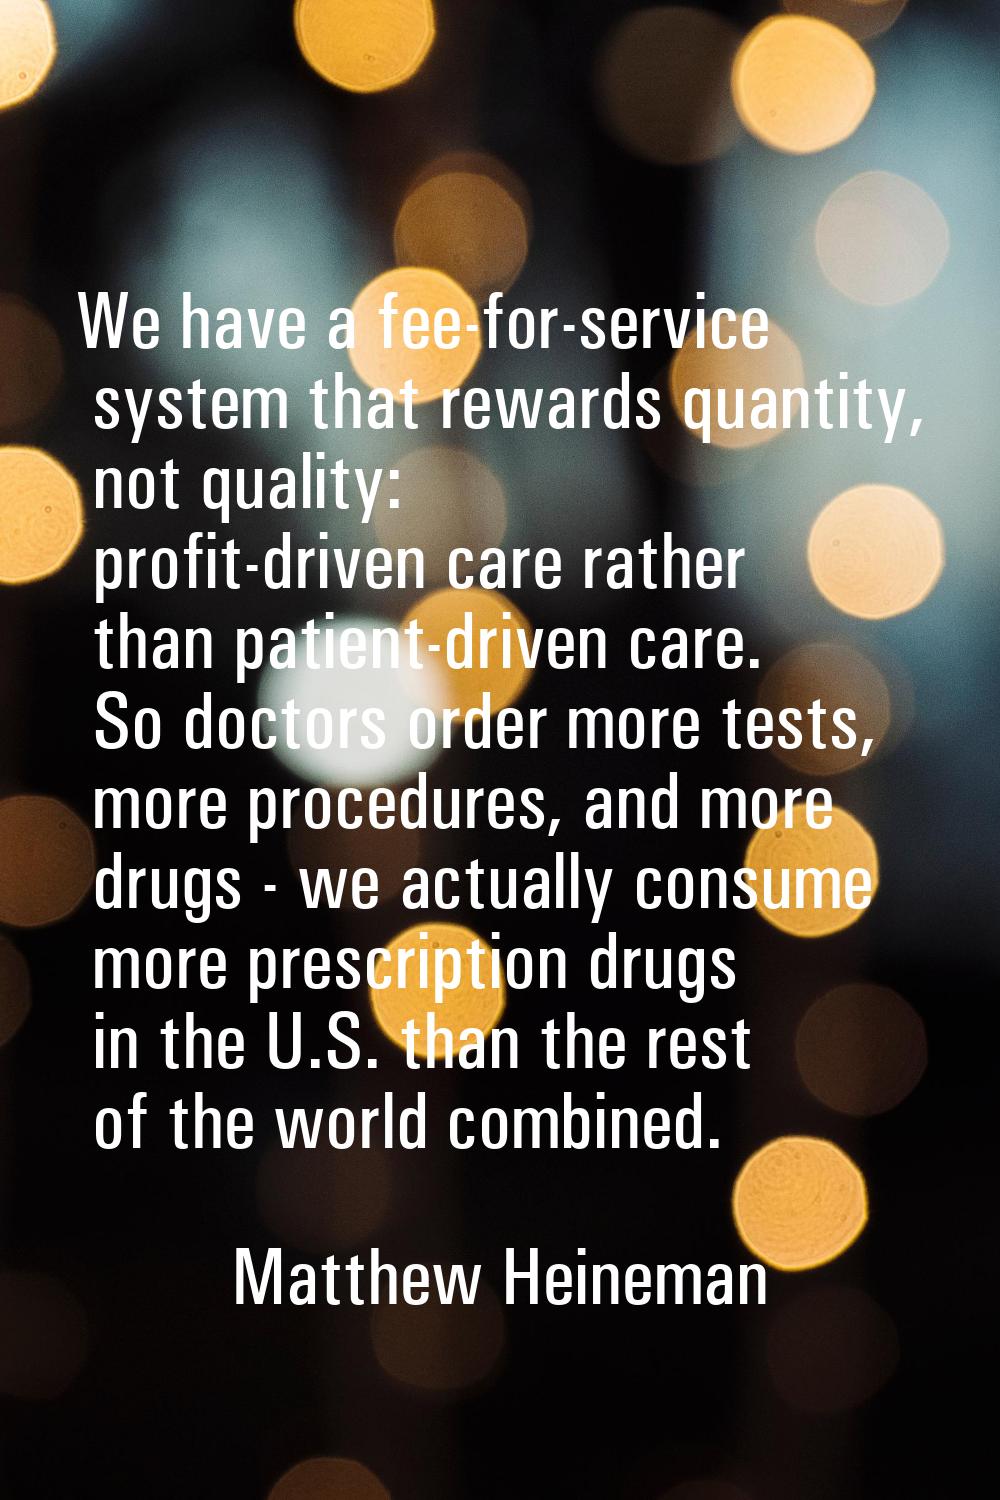 We have a fee-for-service system that rewards quantity, not quality: profit-driven care rather than